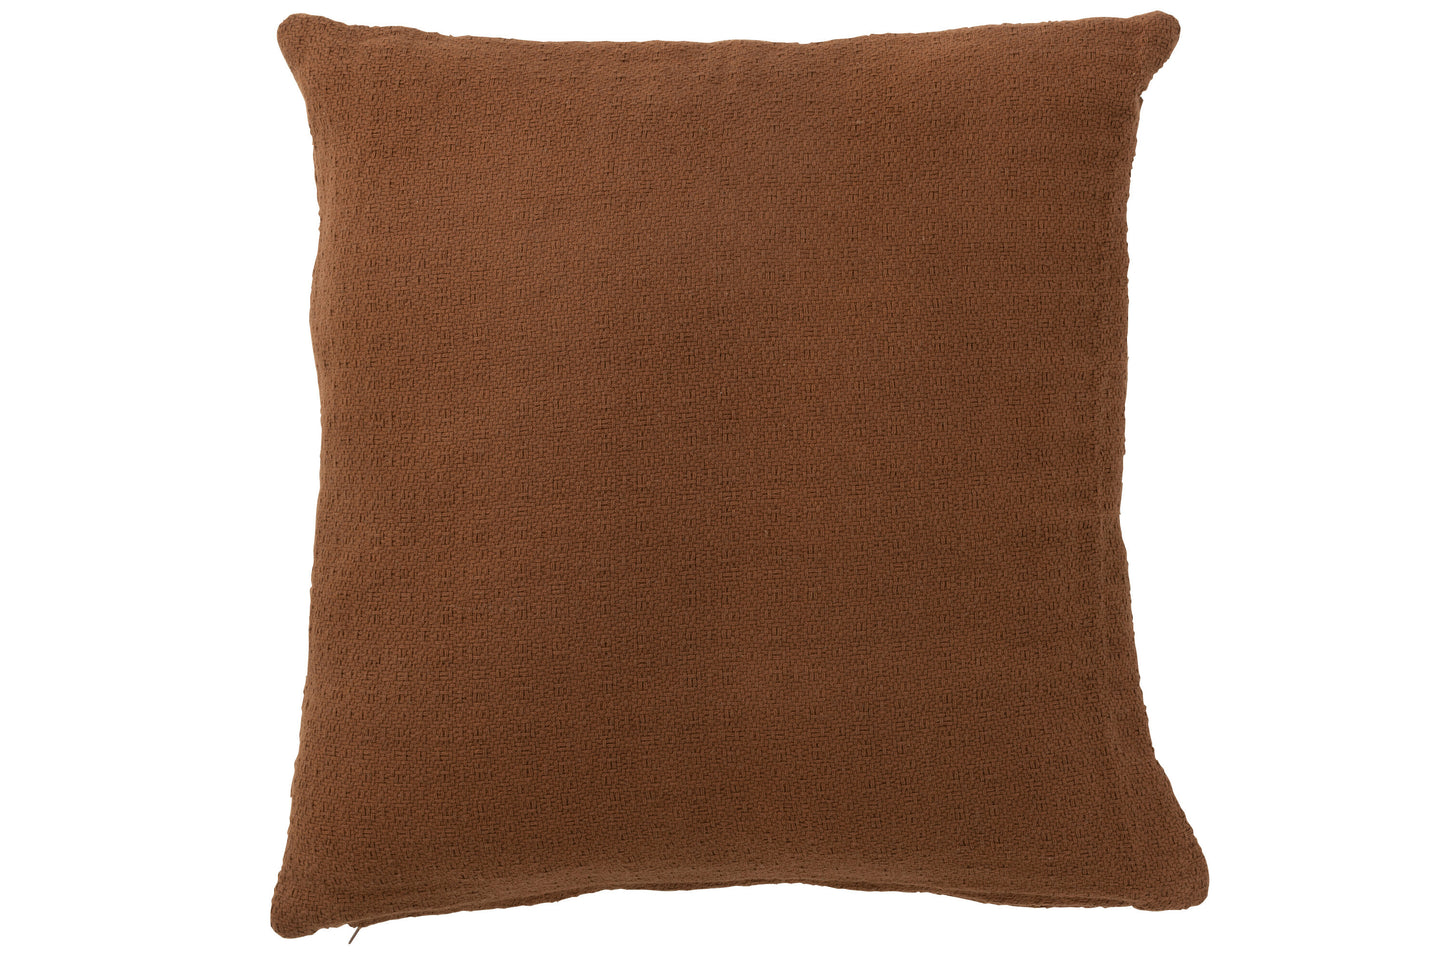 Brown and Off-white Pattern Cushion